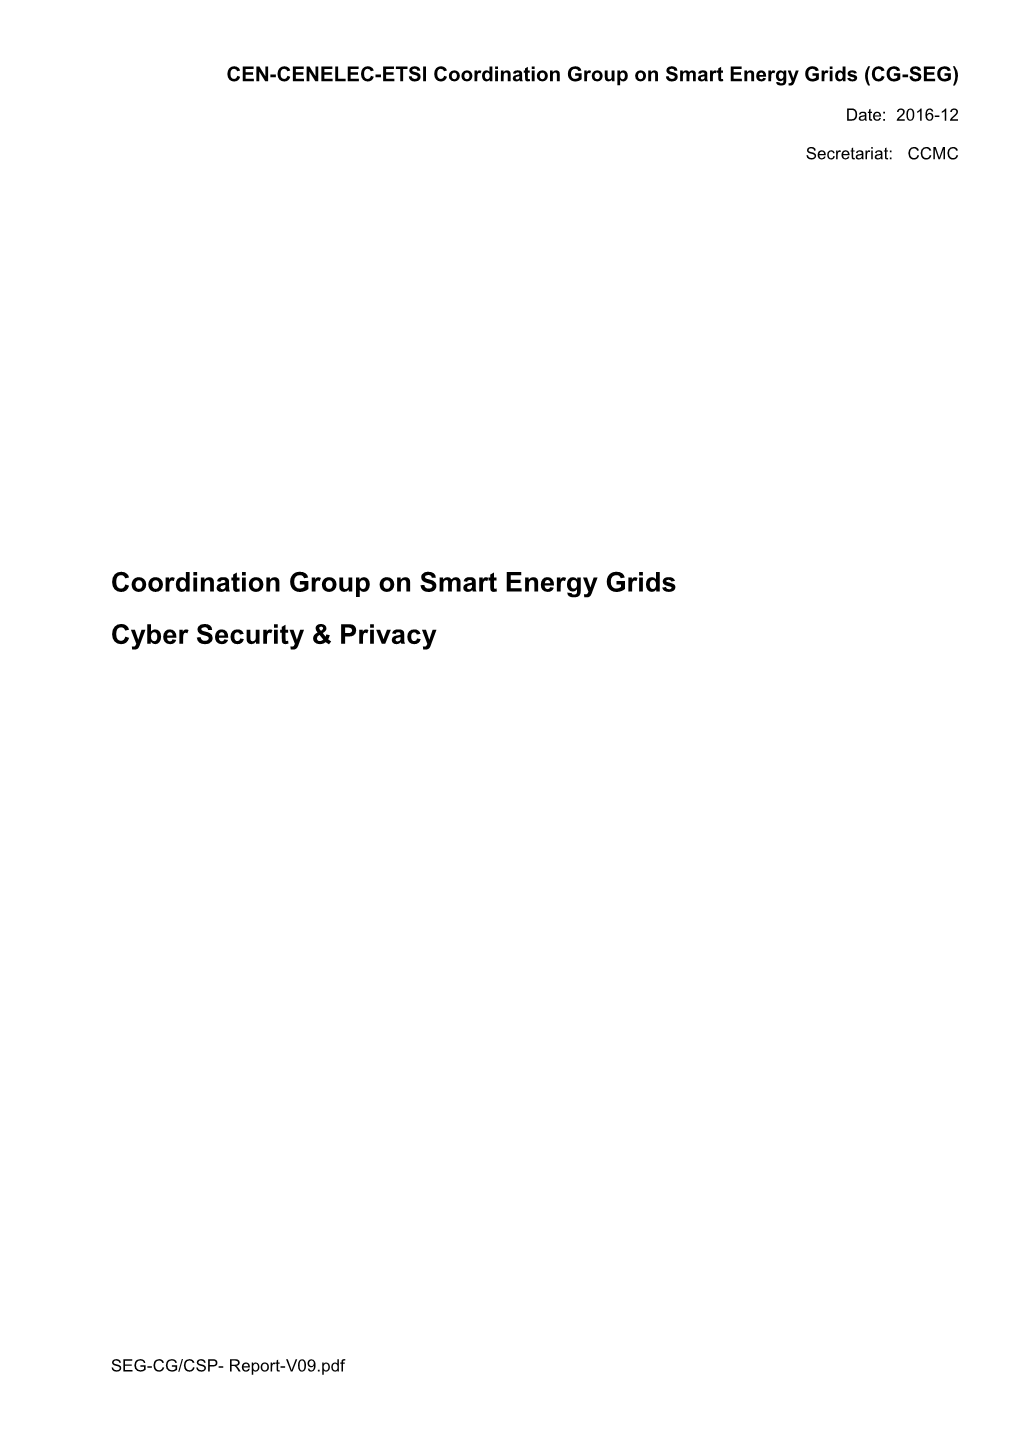 Coordination Group on Smart Energy Grids Cyber Security & Privacy